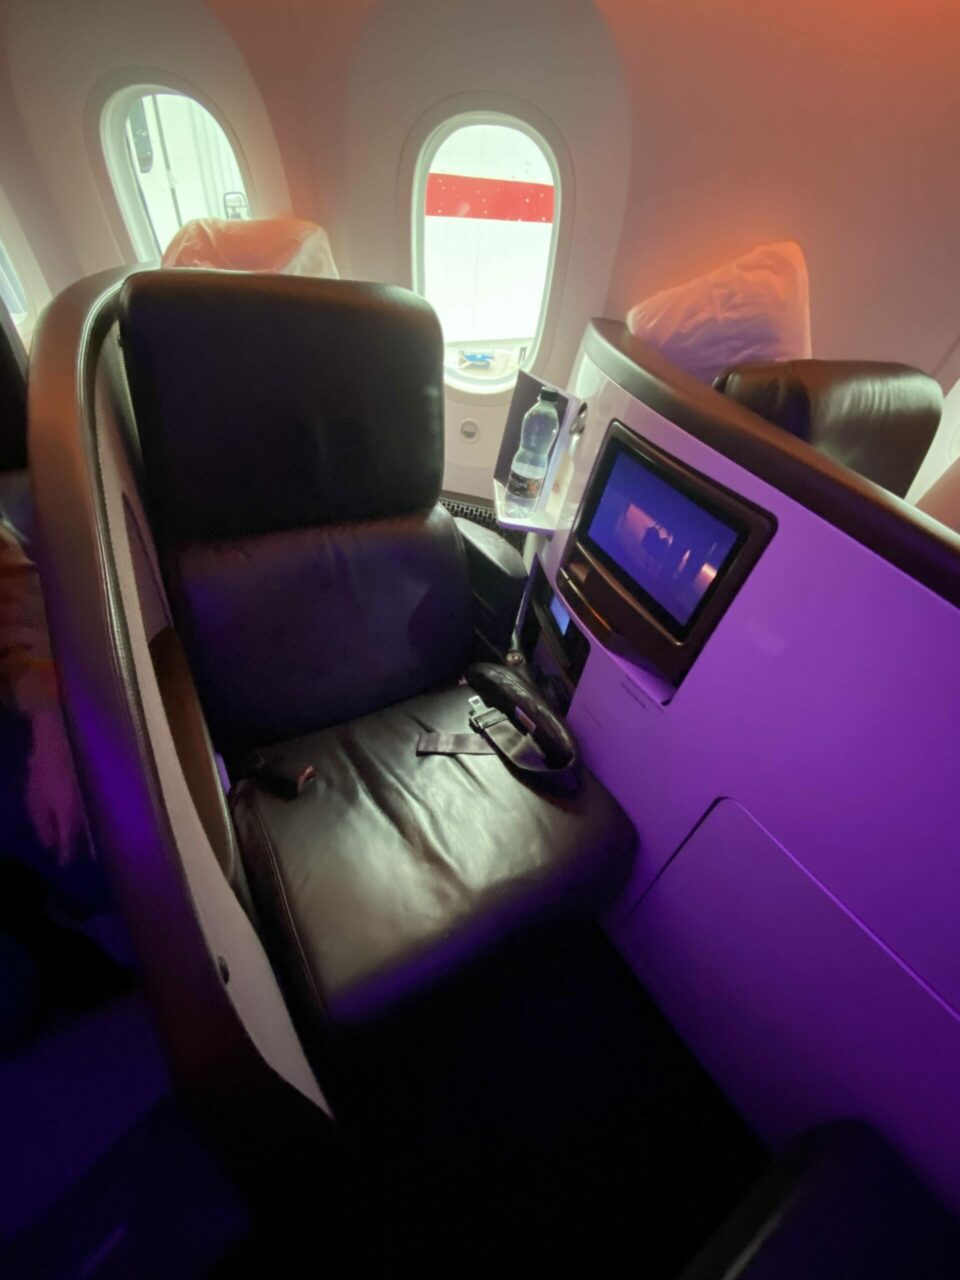 Virgin Atlantic B787 Upper Class seat, Seat 8A but you can see the missing window to the right for 7A 